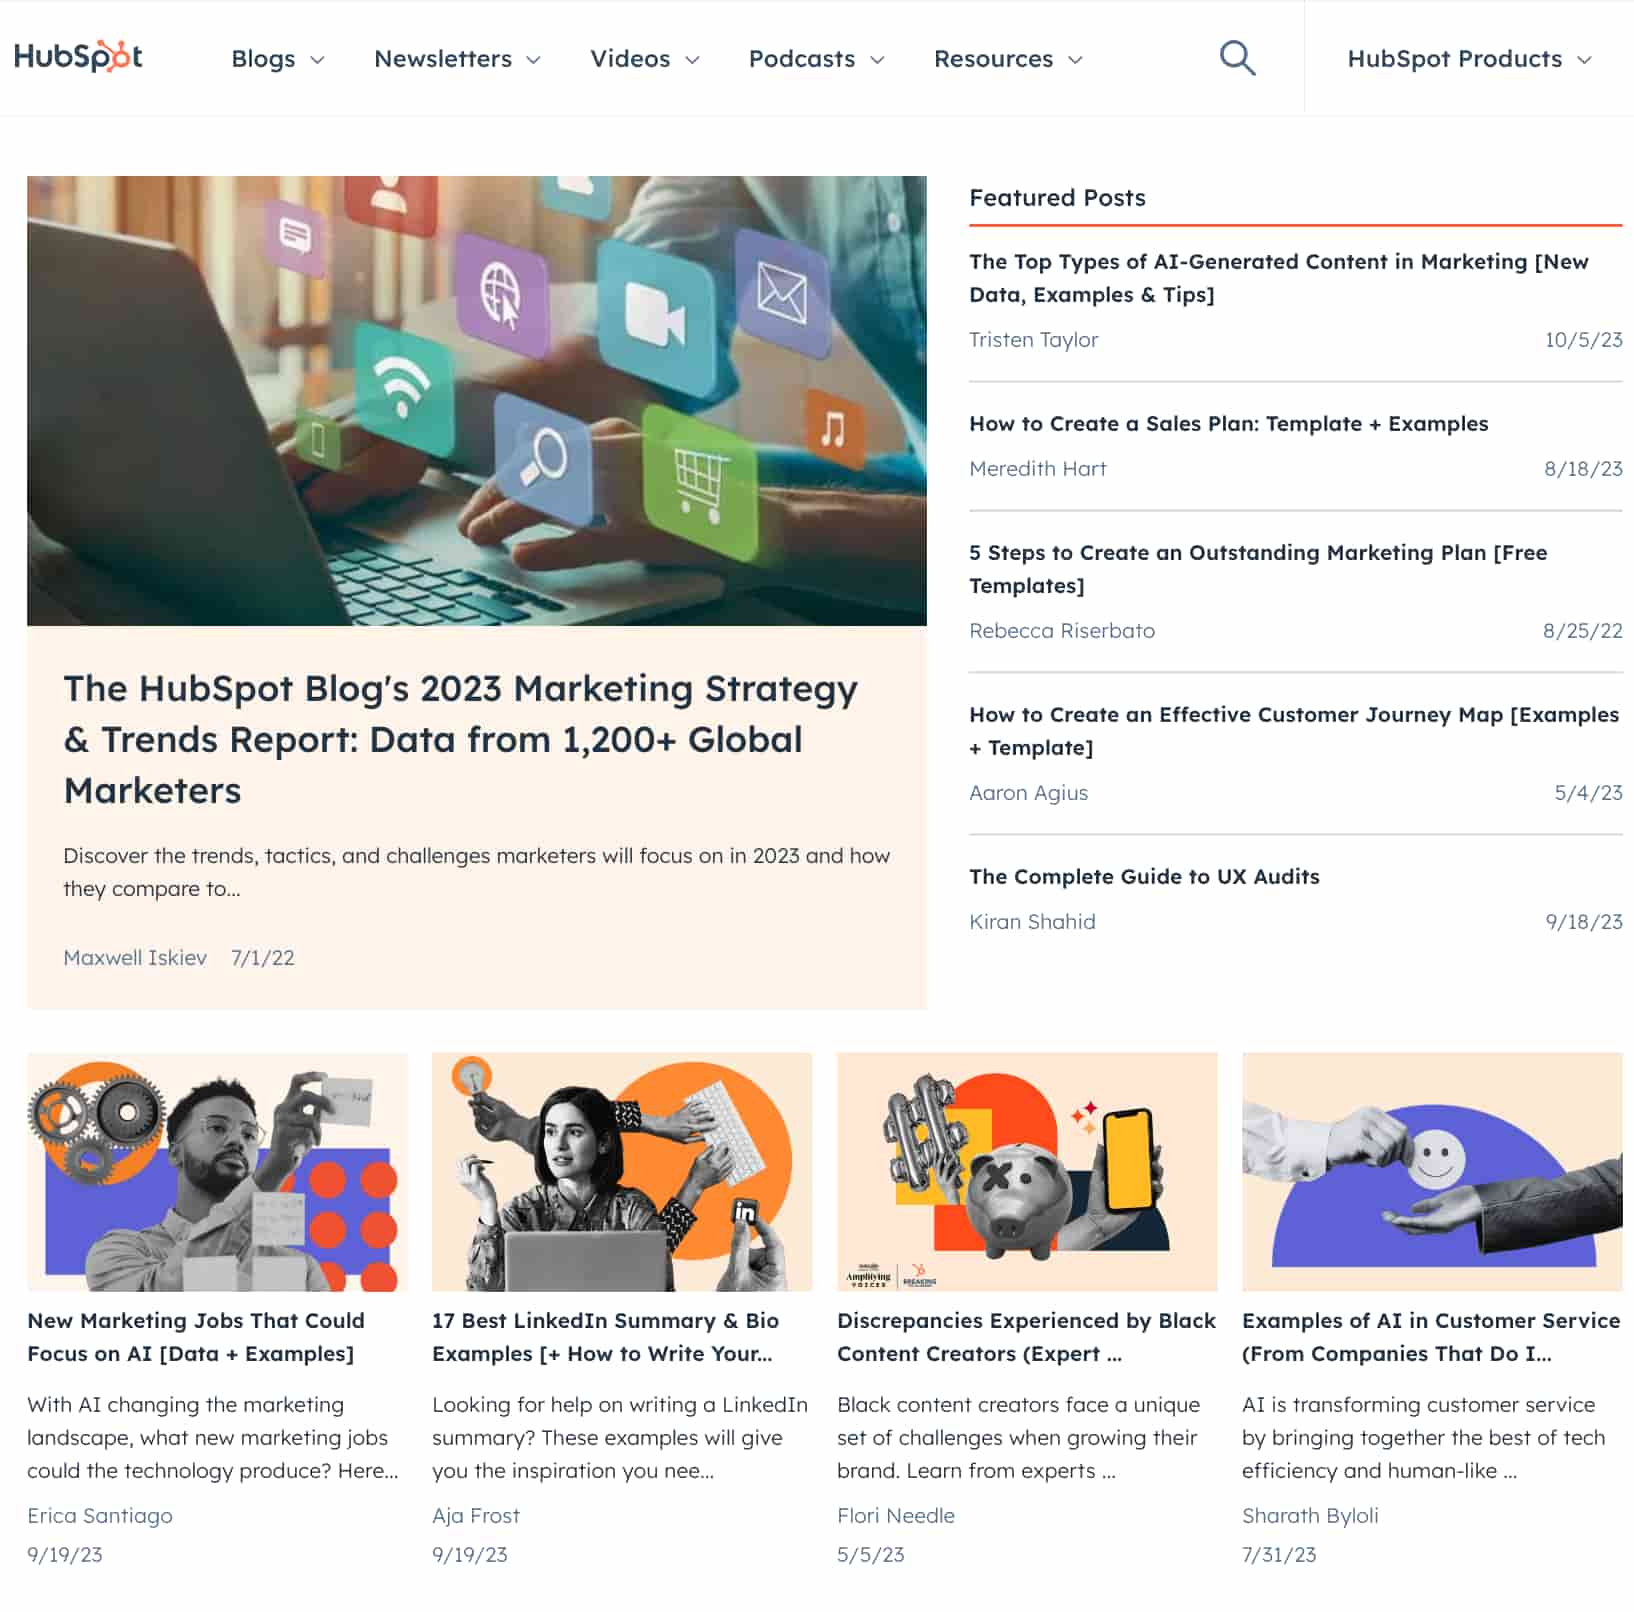 hubspot blog homepage with featured posts and featured images